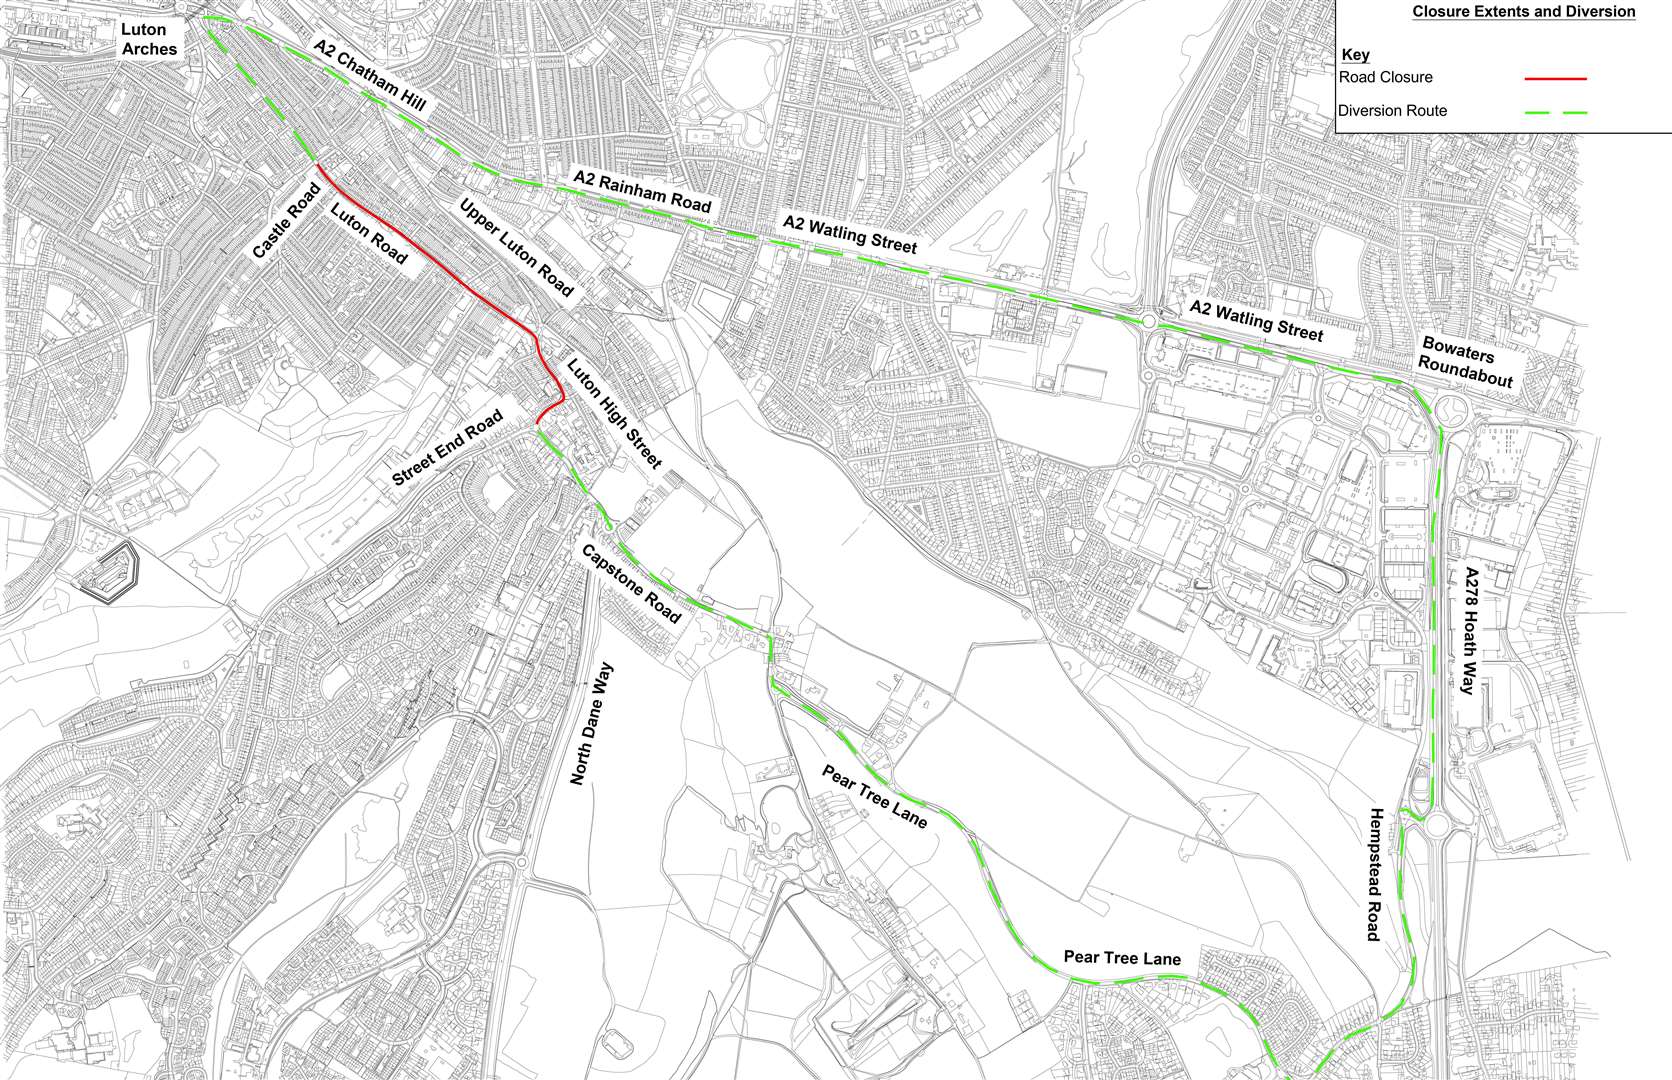 The diversion that will be in place when Luton Road is closed